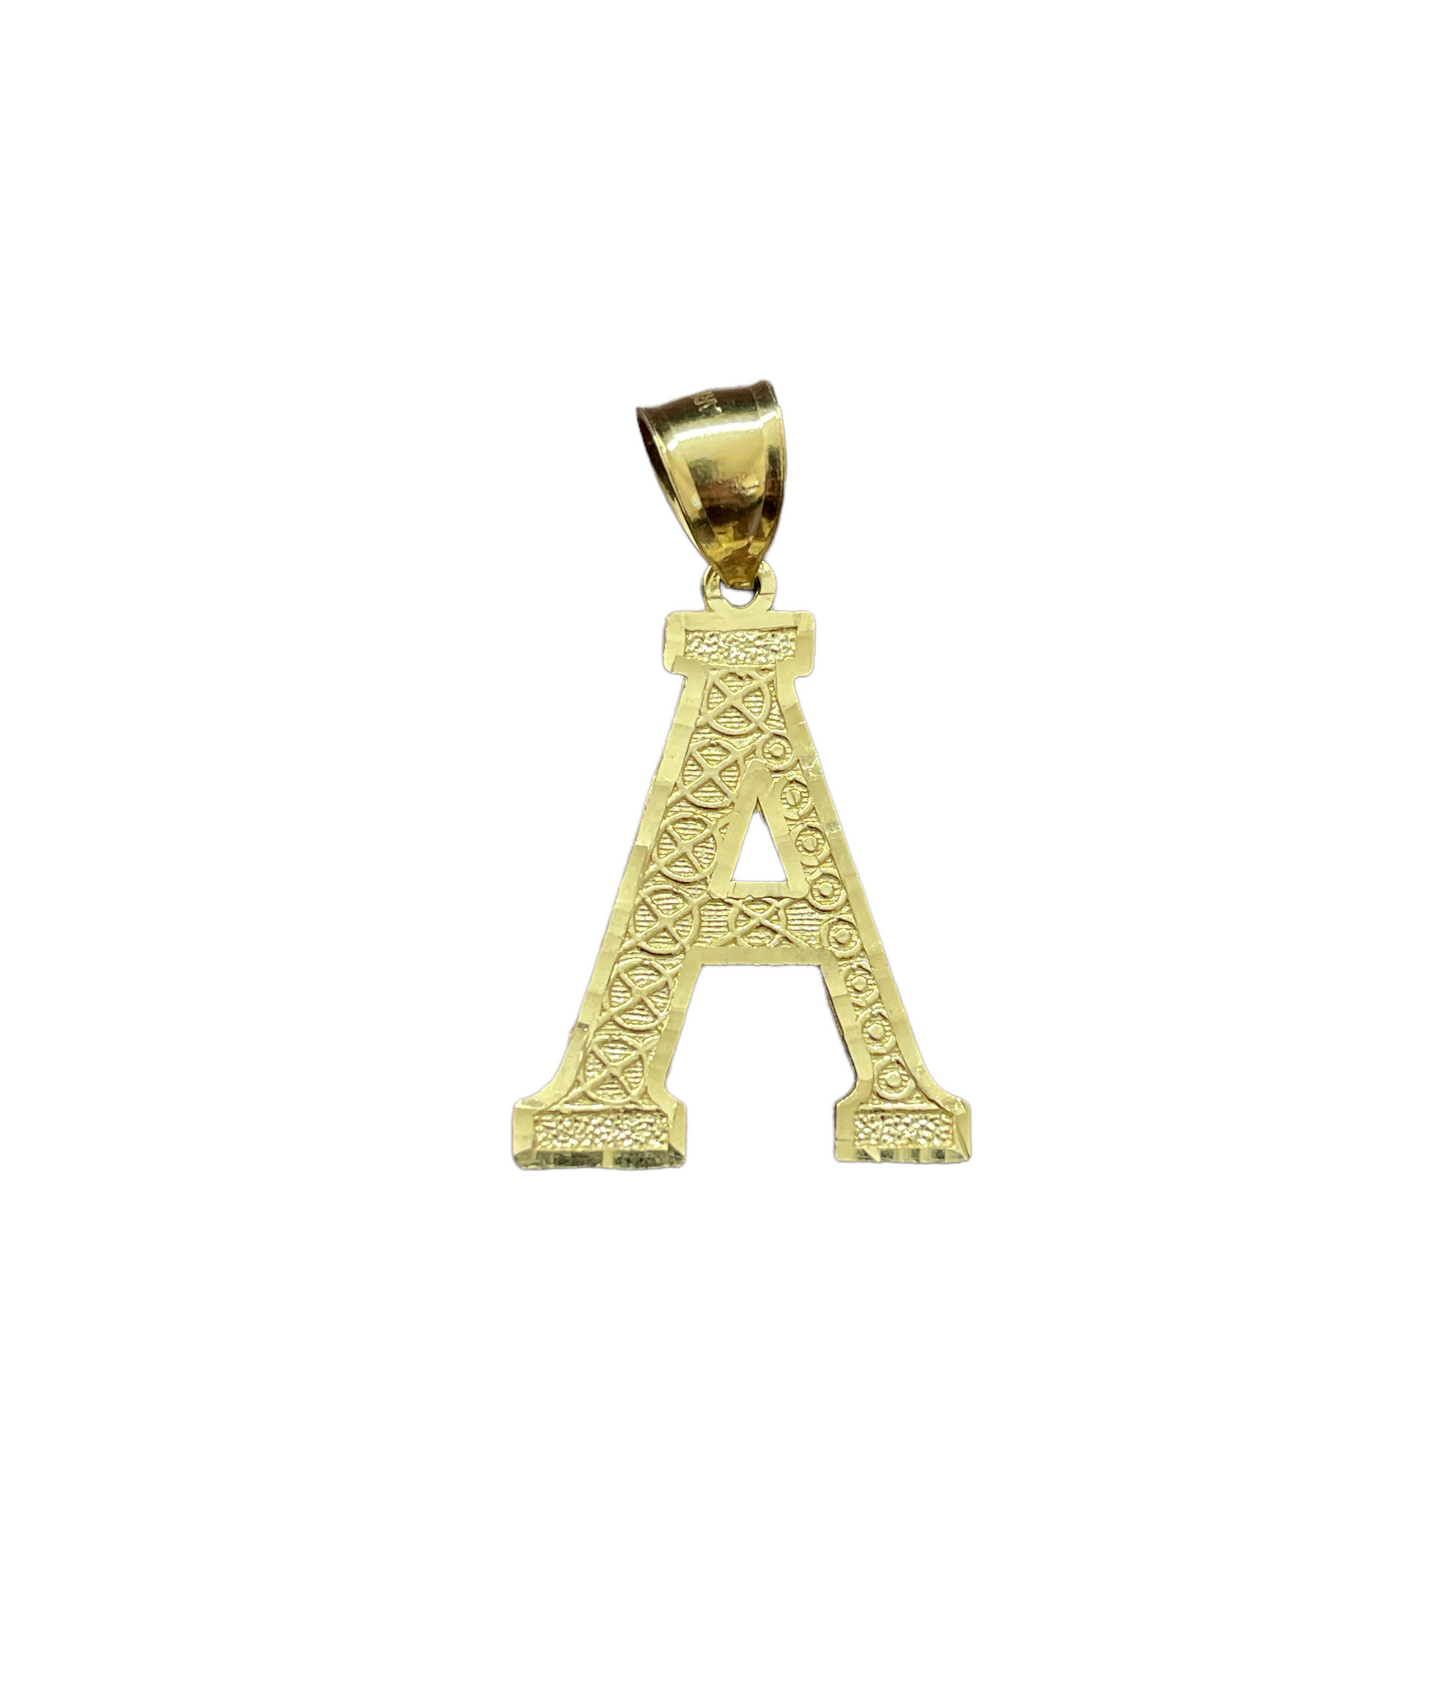 10K Yellow Gold Initial Charm Big Letter "A"